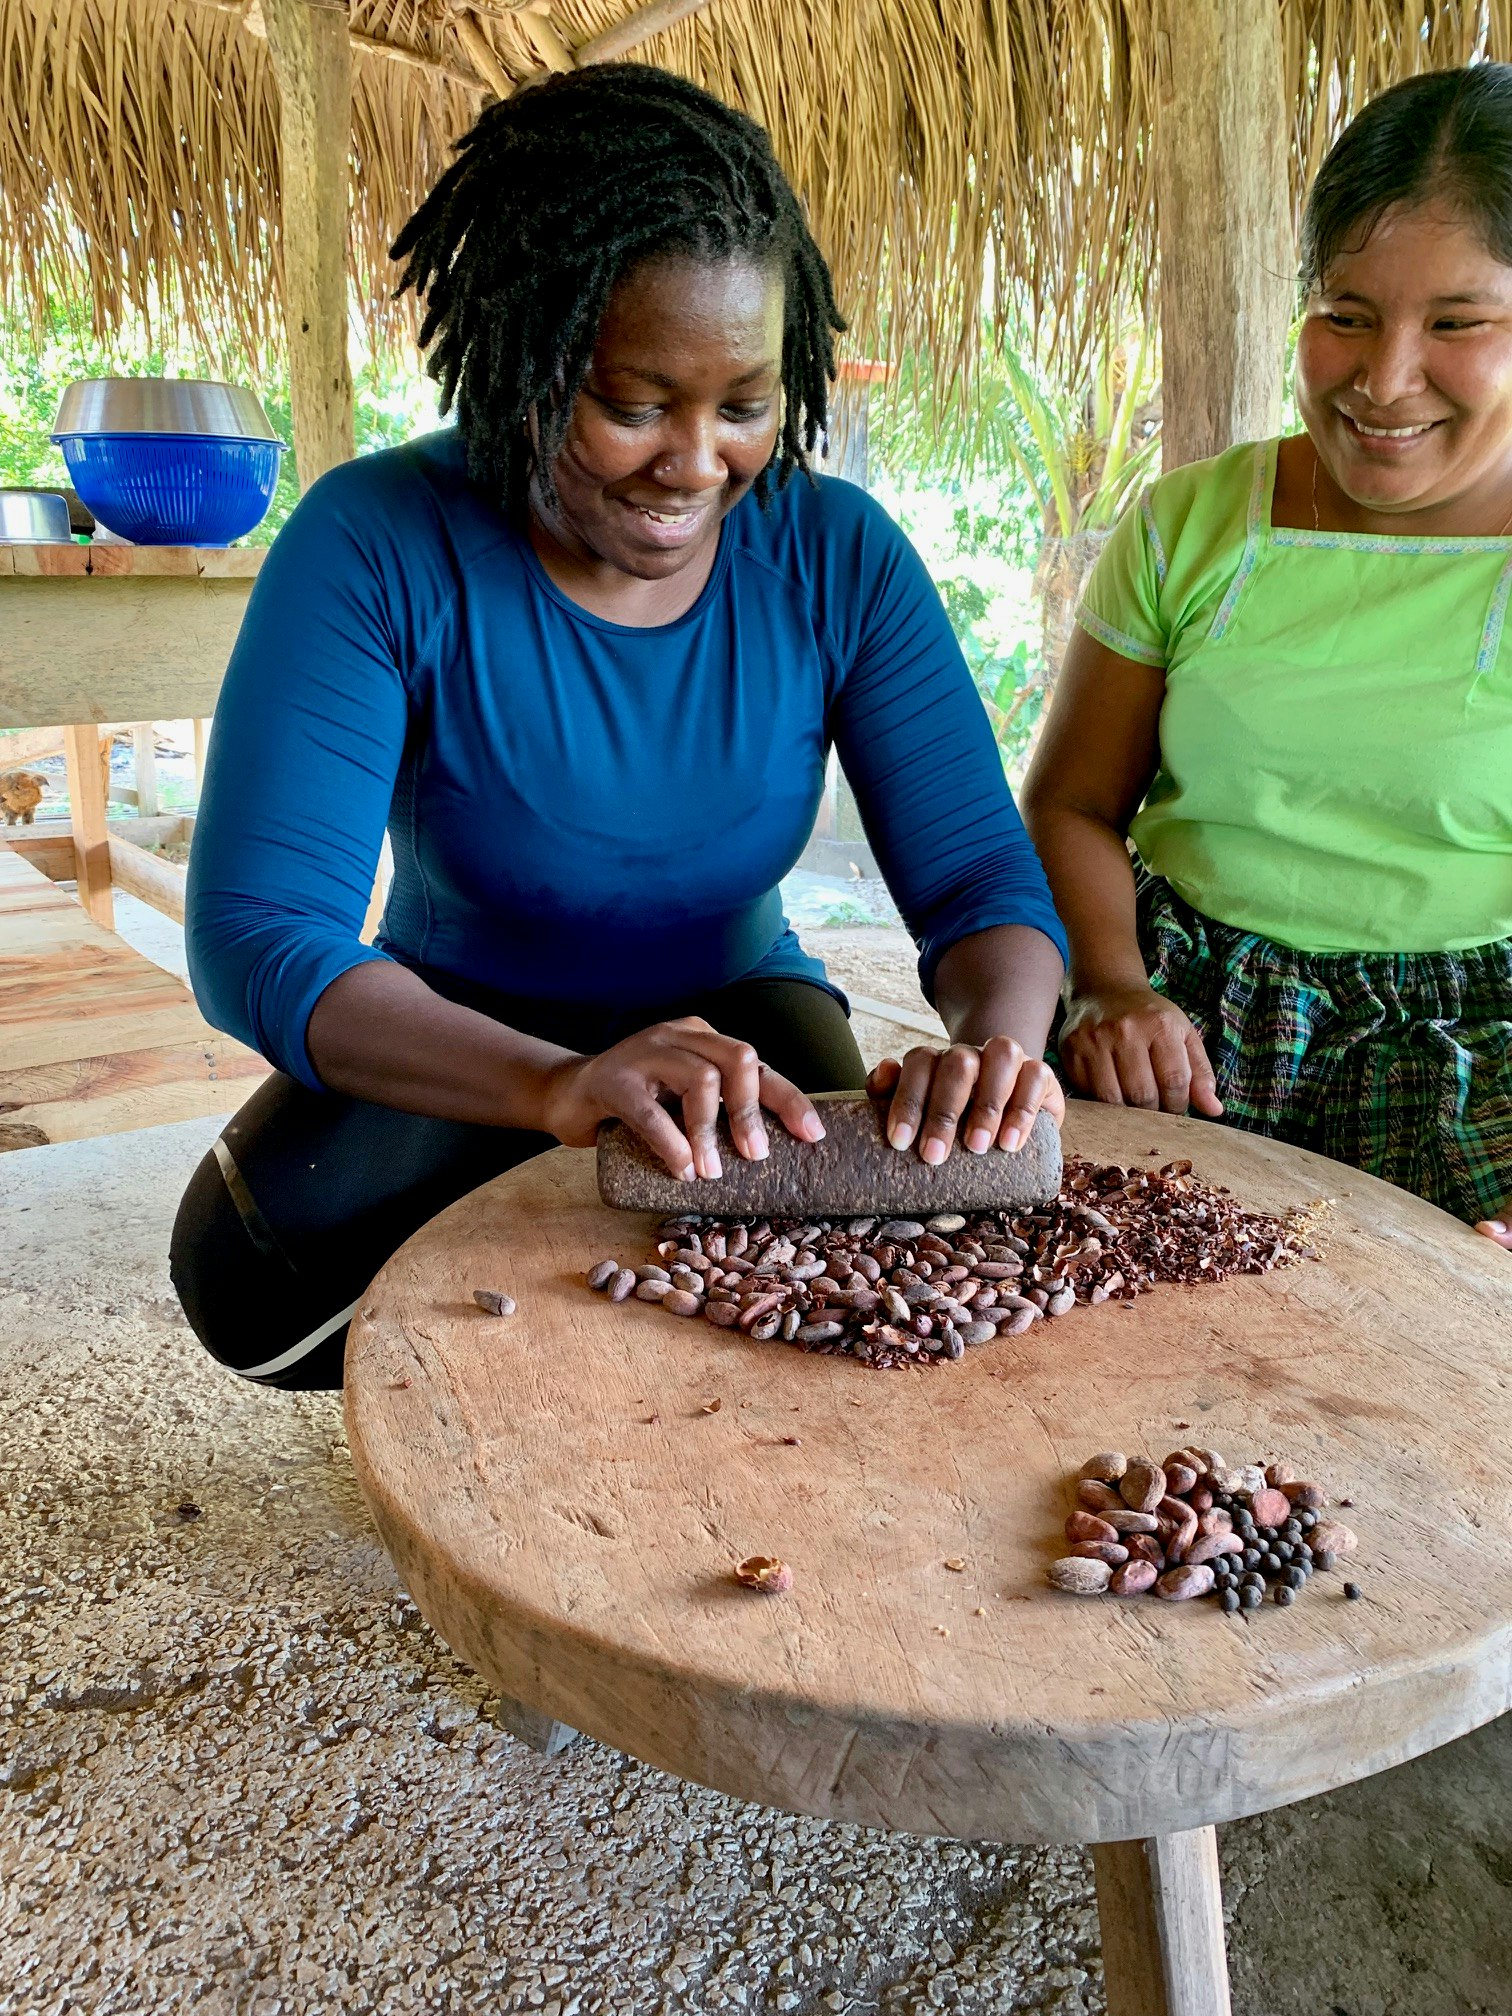 A Mayan woman shows another woman how to crush cacao beans with a volcanic rock pestle